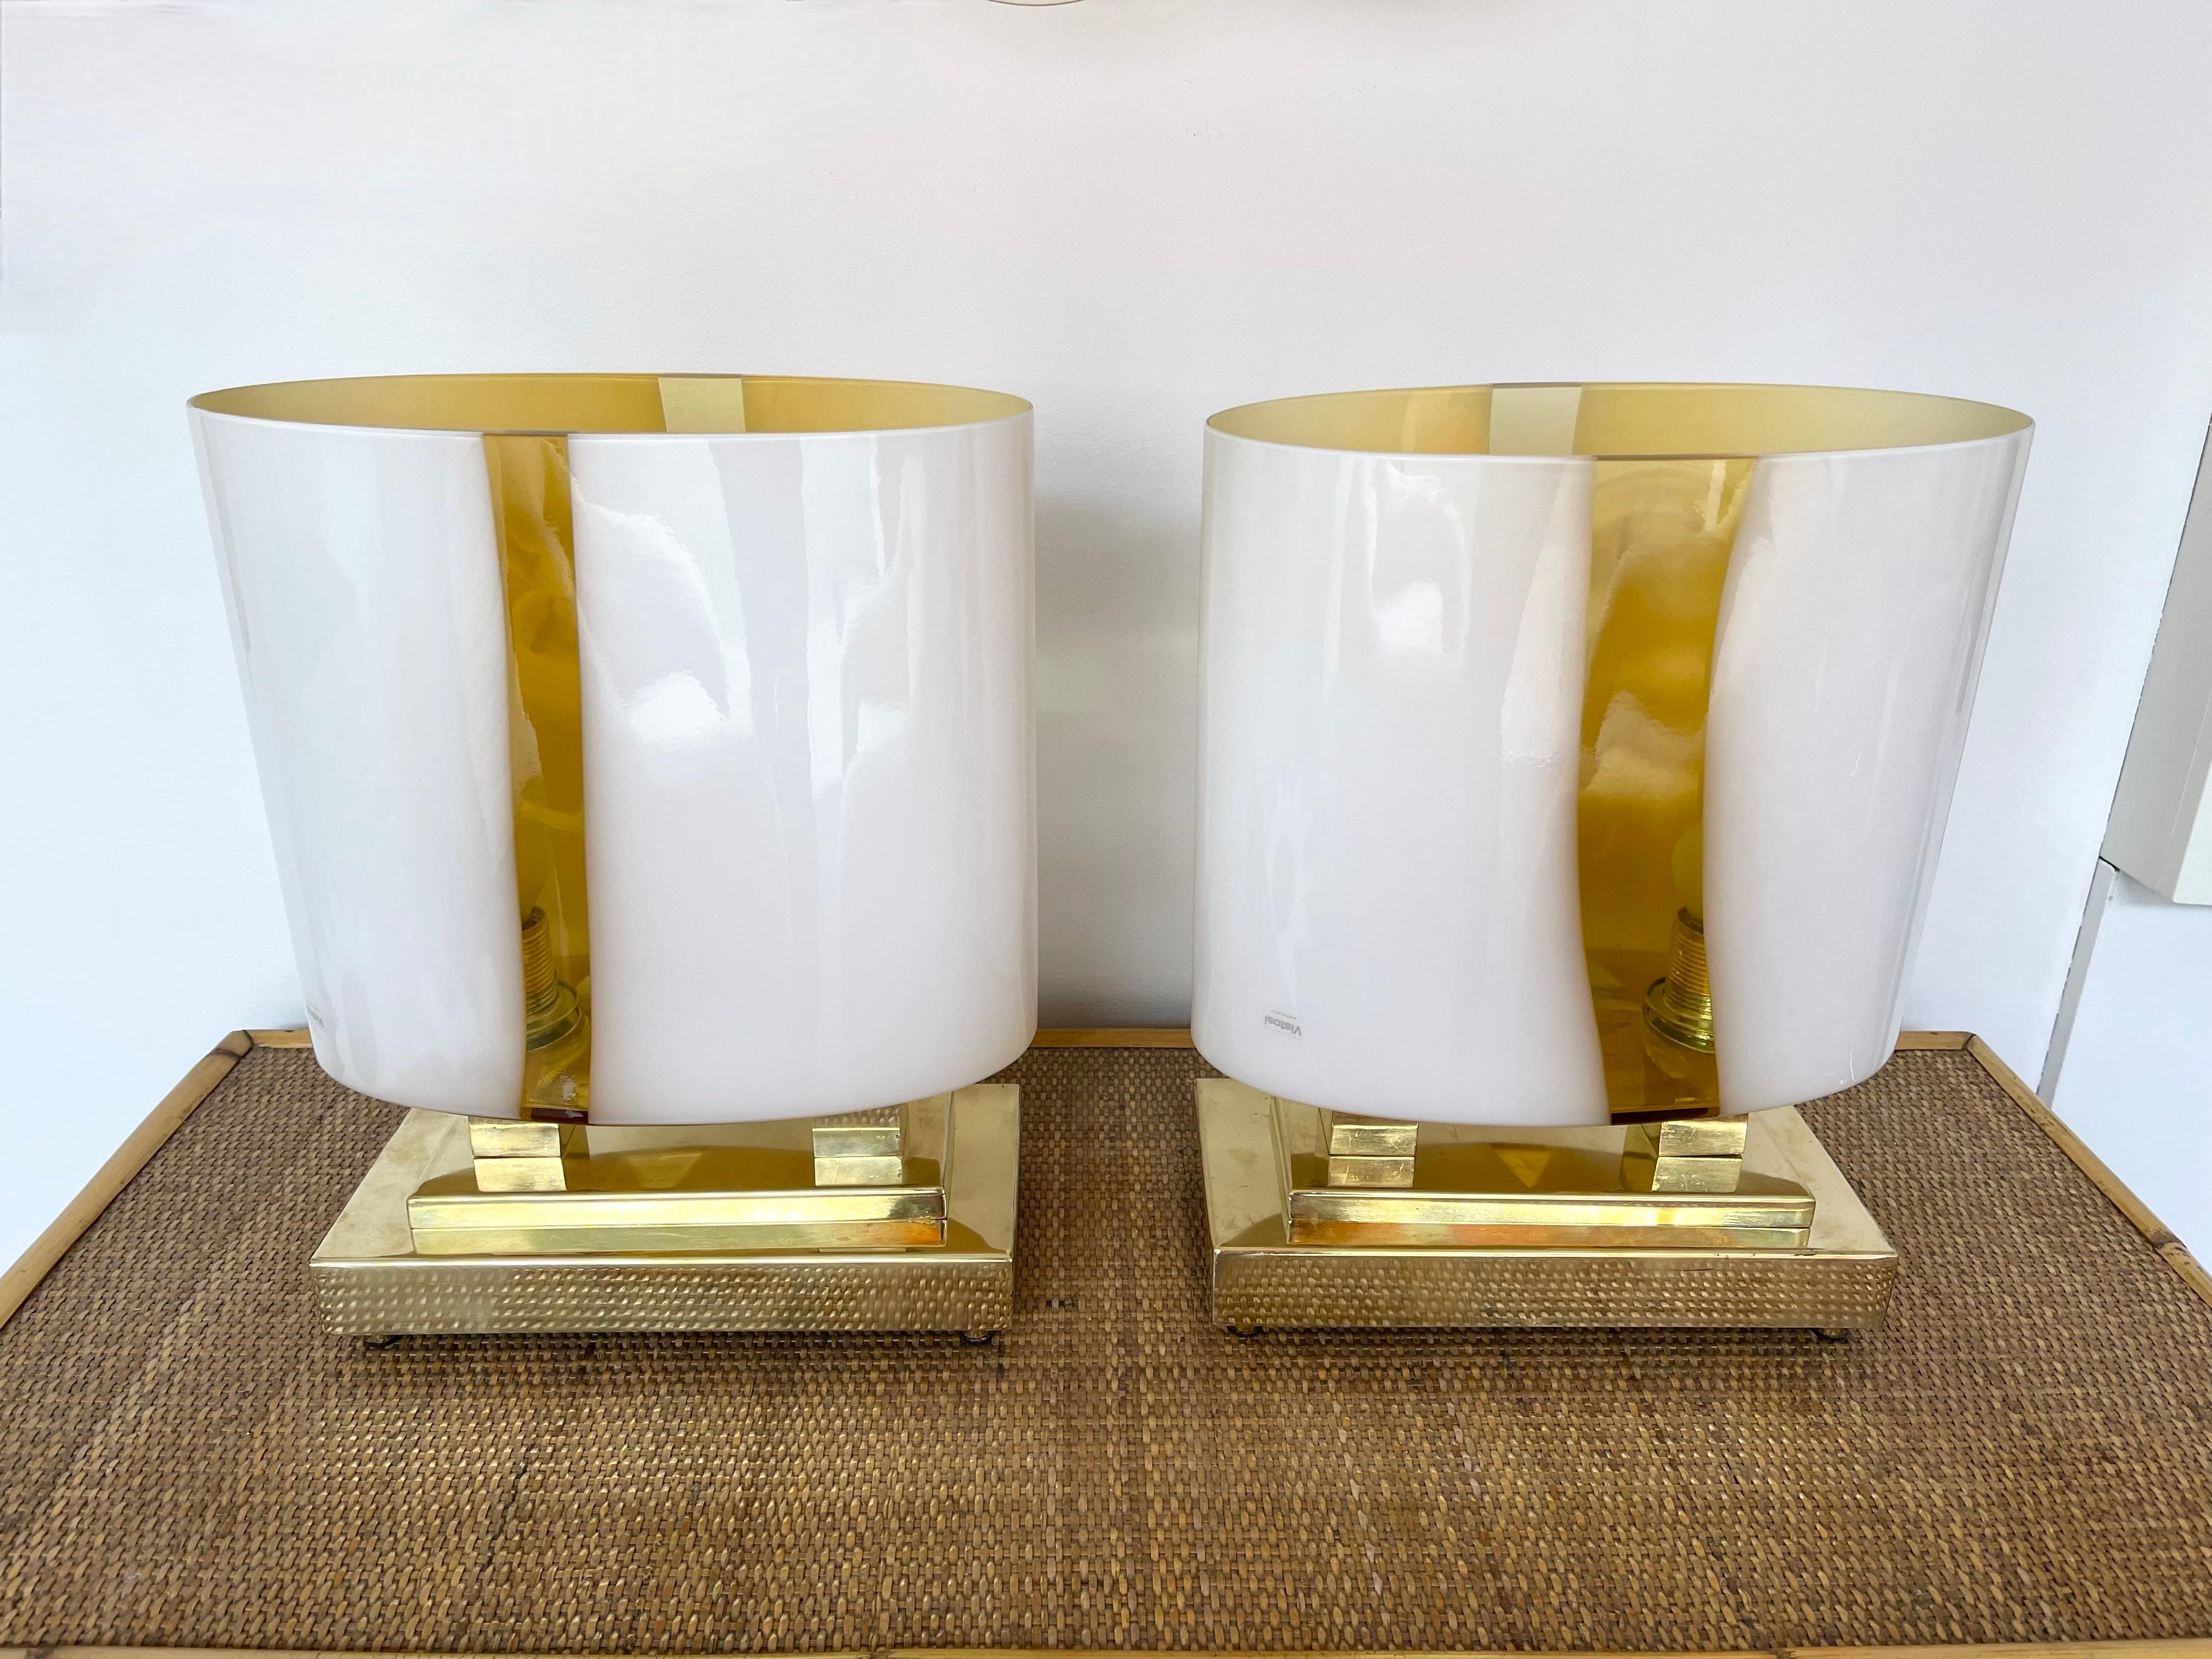 Pair of table or bedside brass lamps and Murano glass. Made with old stock of glass from the manufacture Vistosi. High quality glass, original stamp from the manufacture. Contemporary work from a small italian artisanal workshop. In the mood of